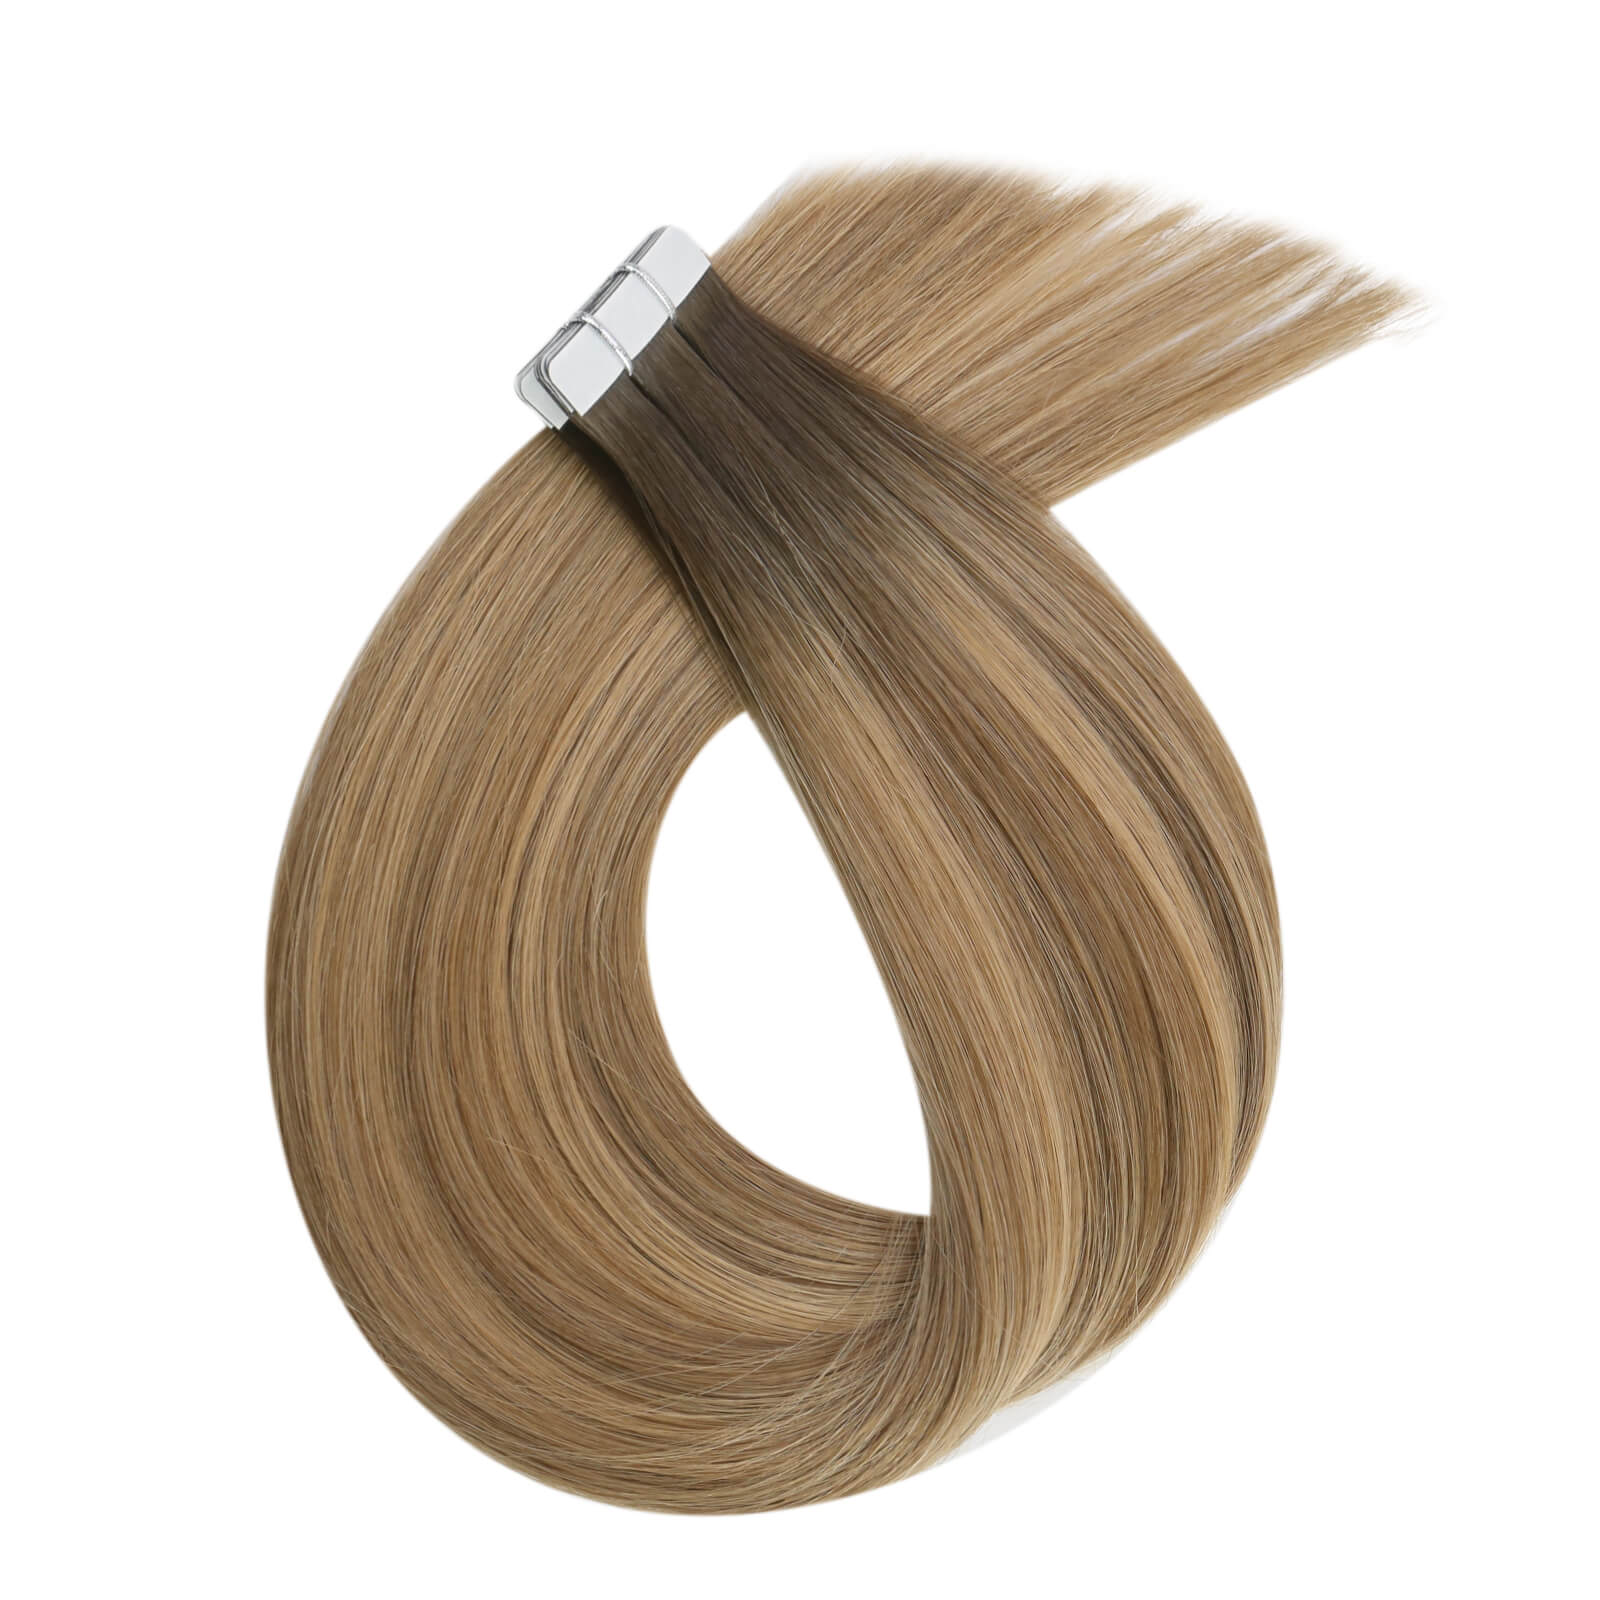 tape in extensions, tape in hair extensions, best tape in hair extensions, tape in extensions human hair, invisible tape in extensions,